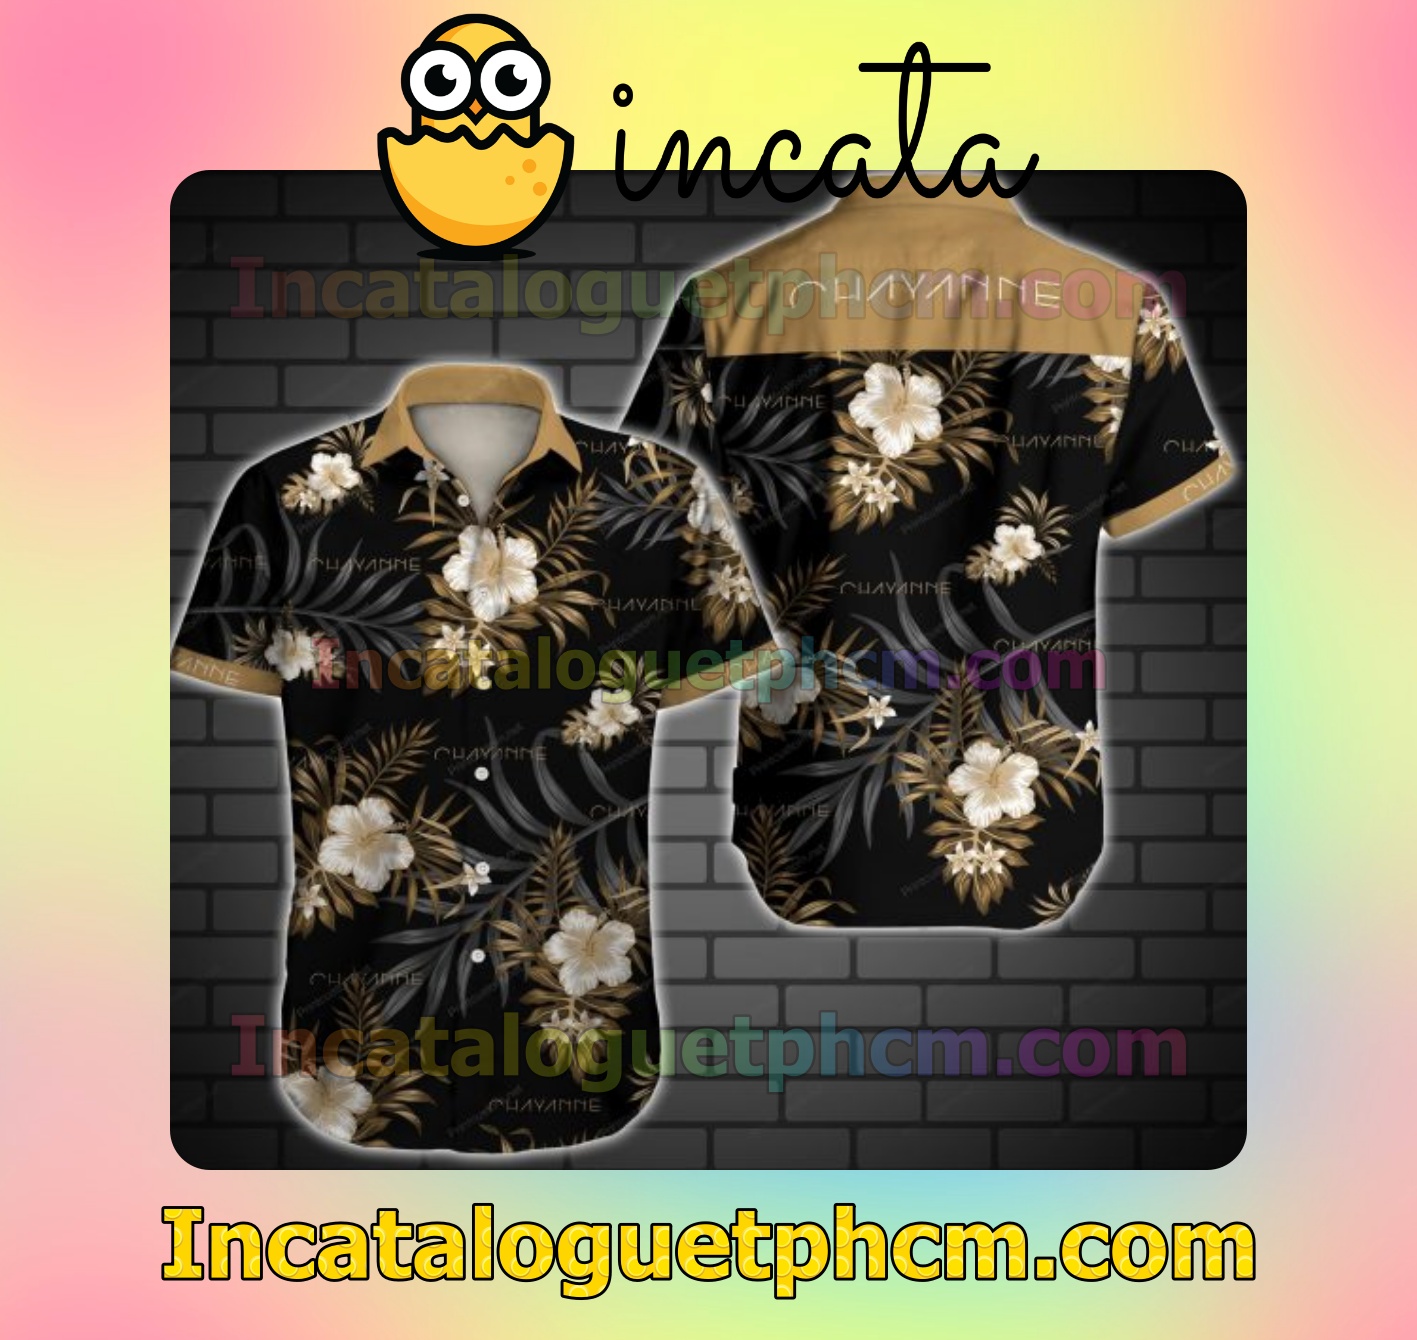 Chayanne Brown Tropical Floral Black Mens Short Sleeve Shirts